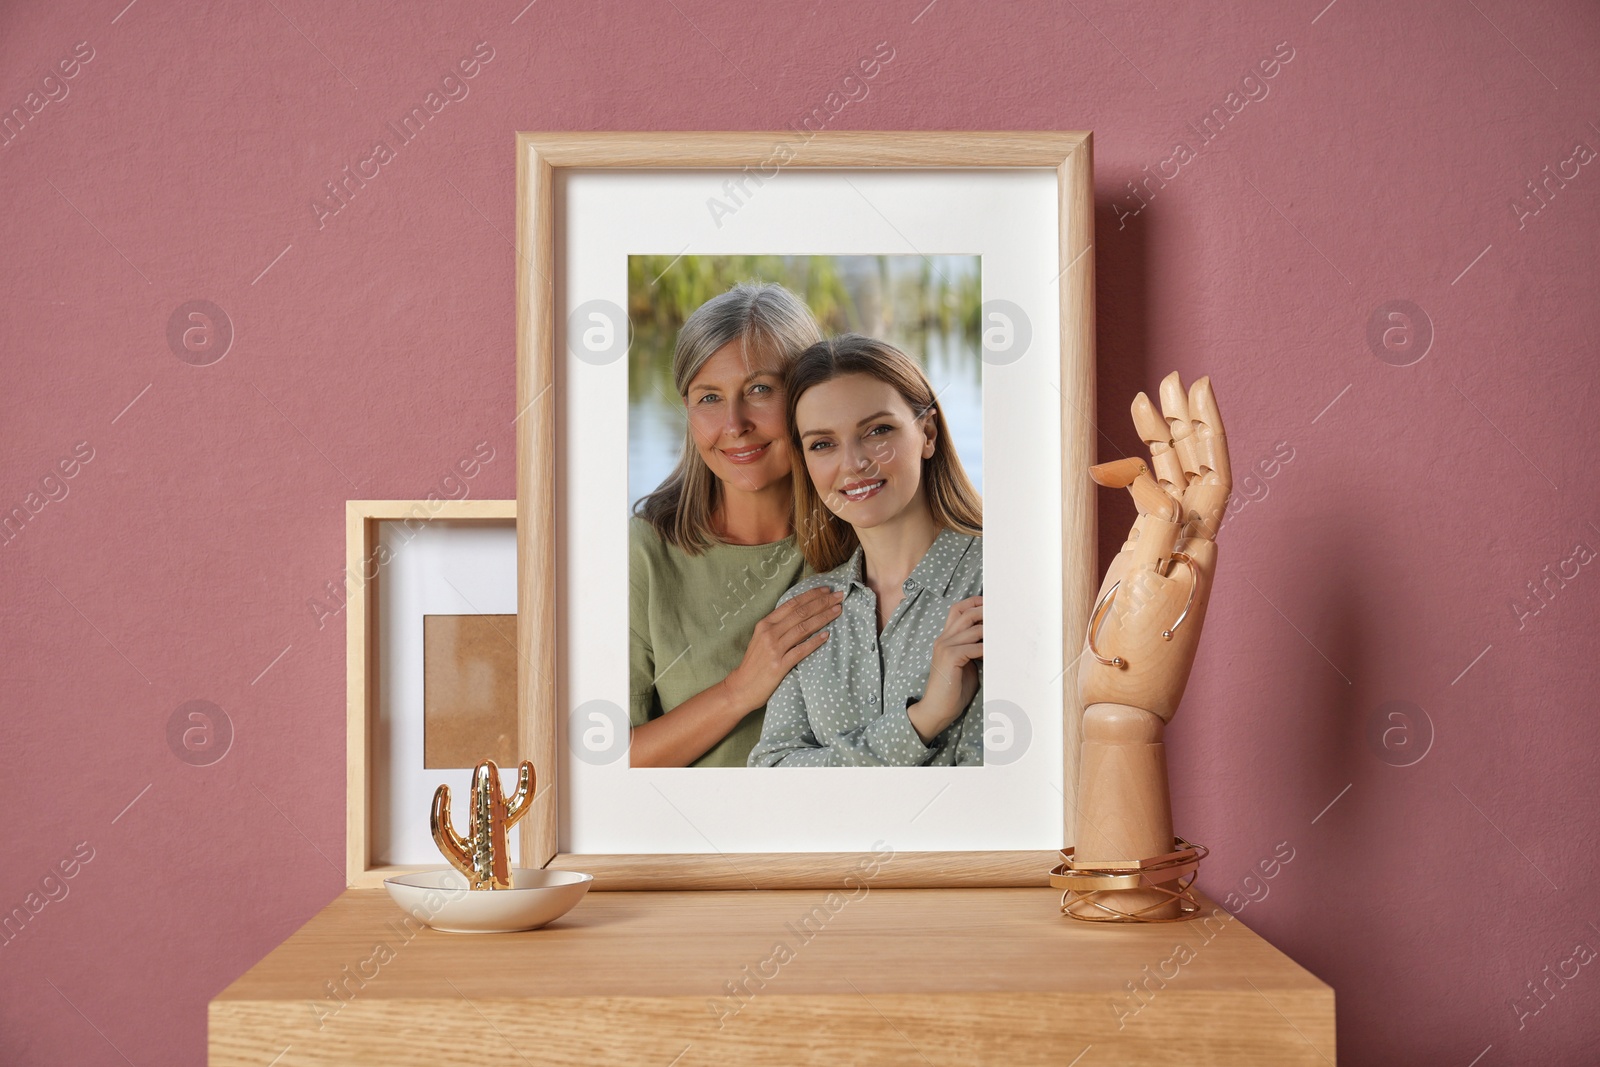 Image of Family portrait of mother and daughter in photo frame on table near color wall